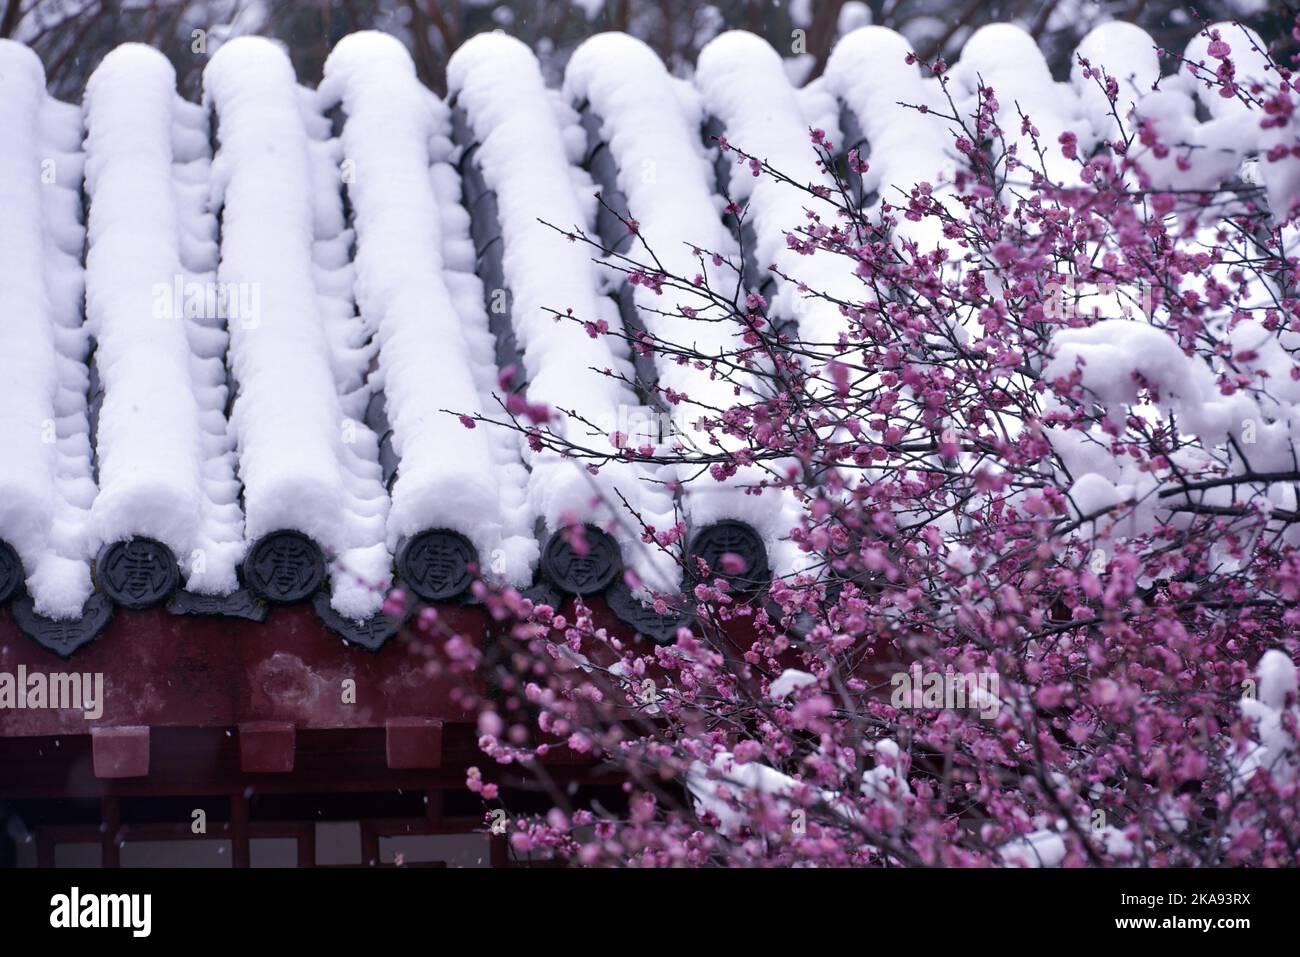 A view of a rooftop covered with white snow and a sakura tree blooming on the foreground in winter Stock Photo